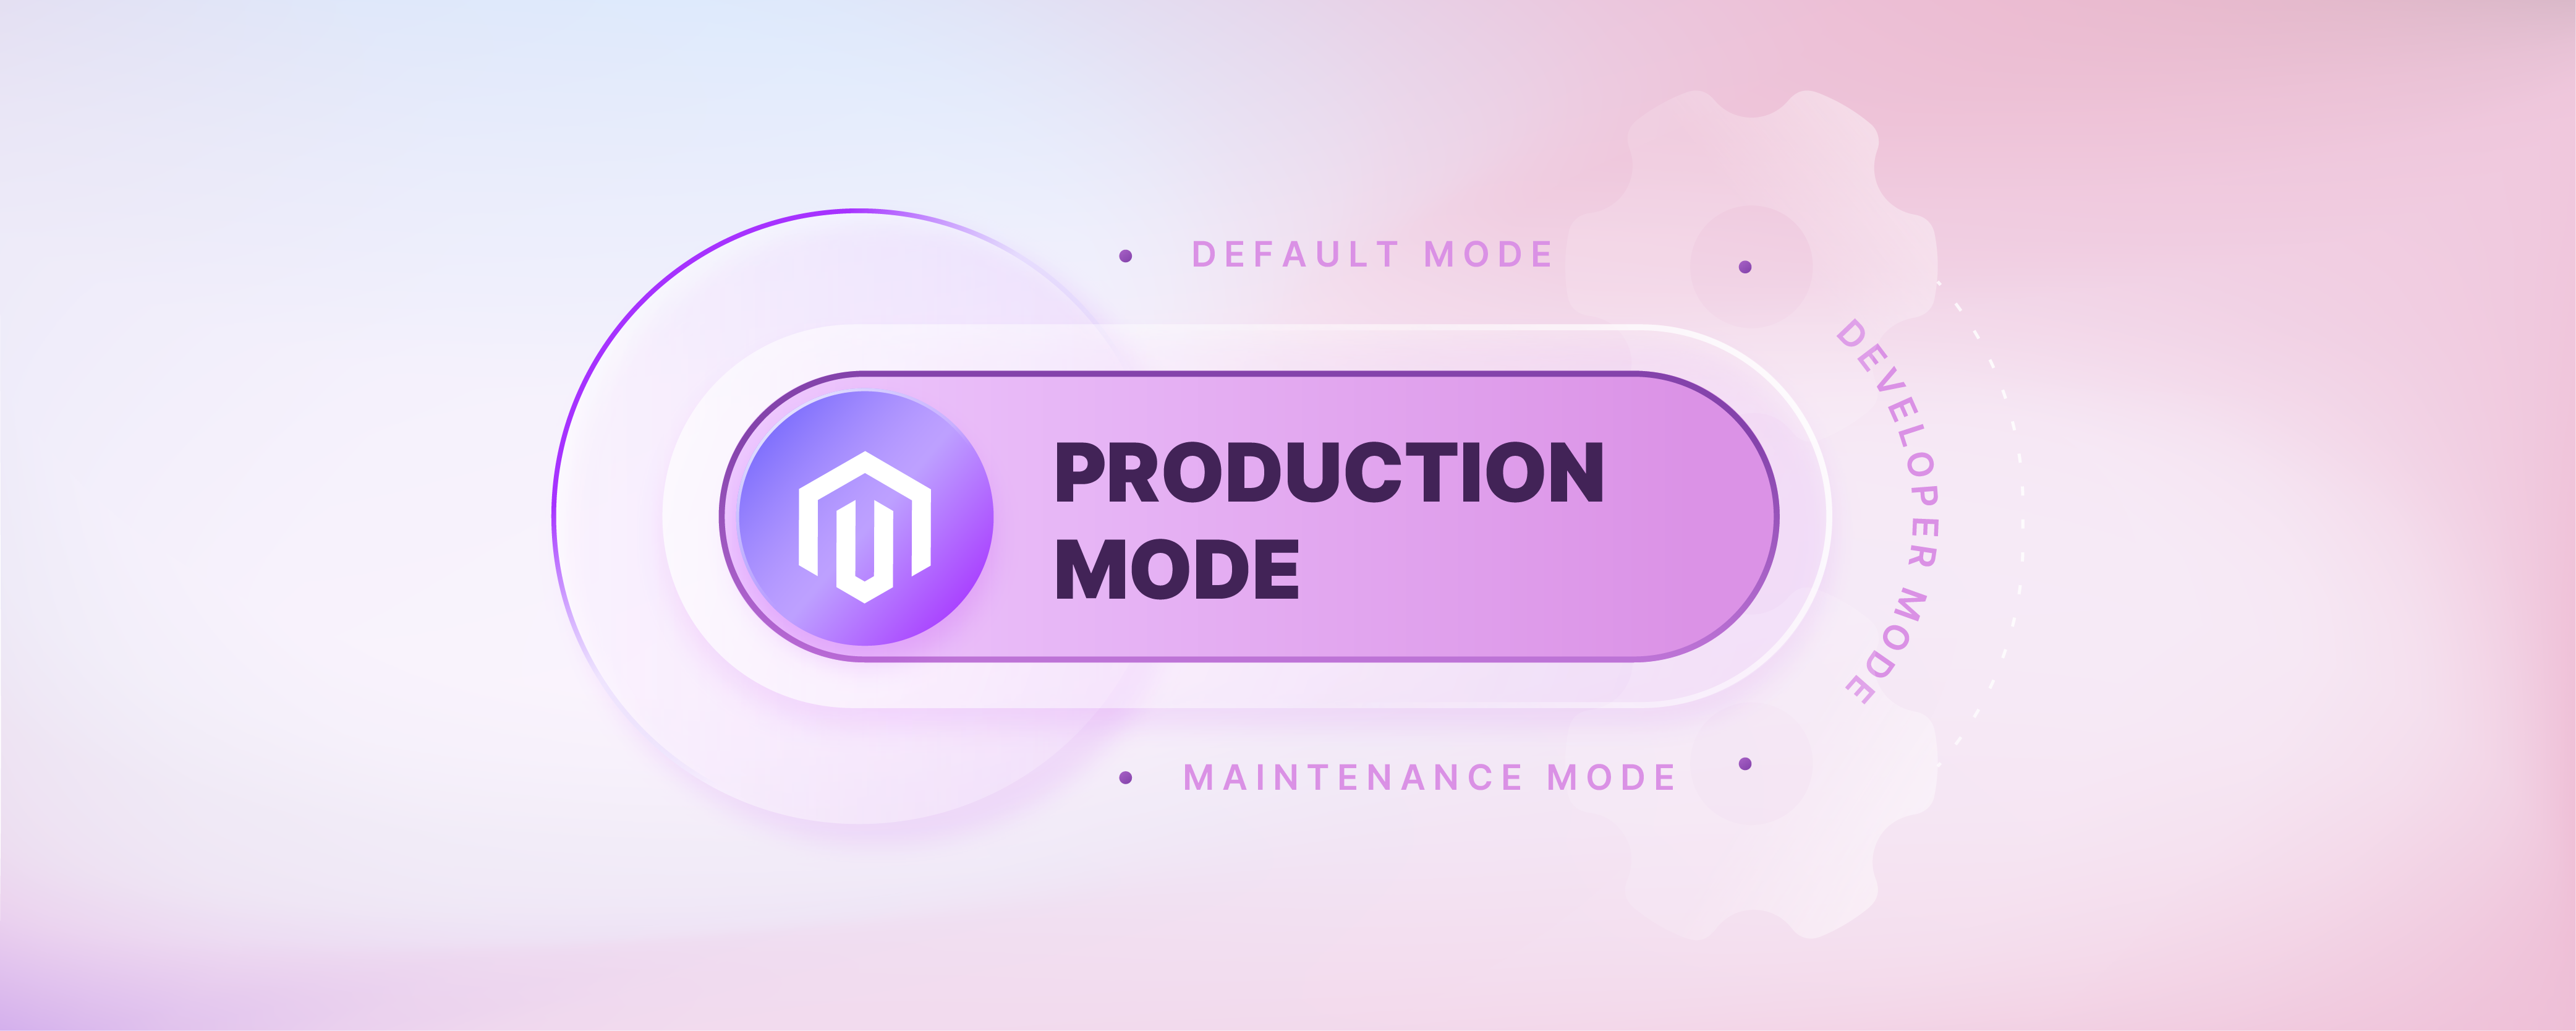 How to Set Production Mode in Magento 2